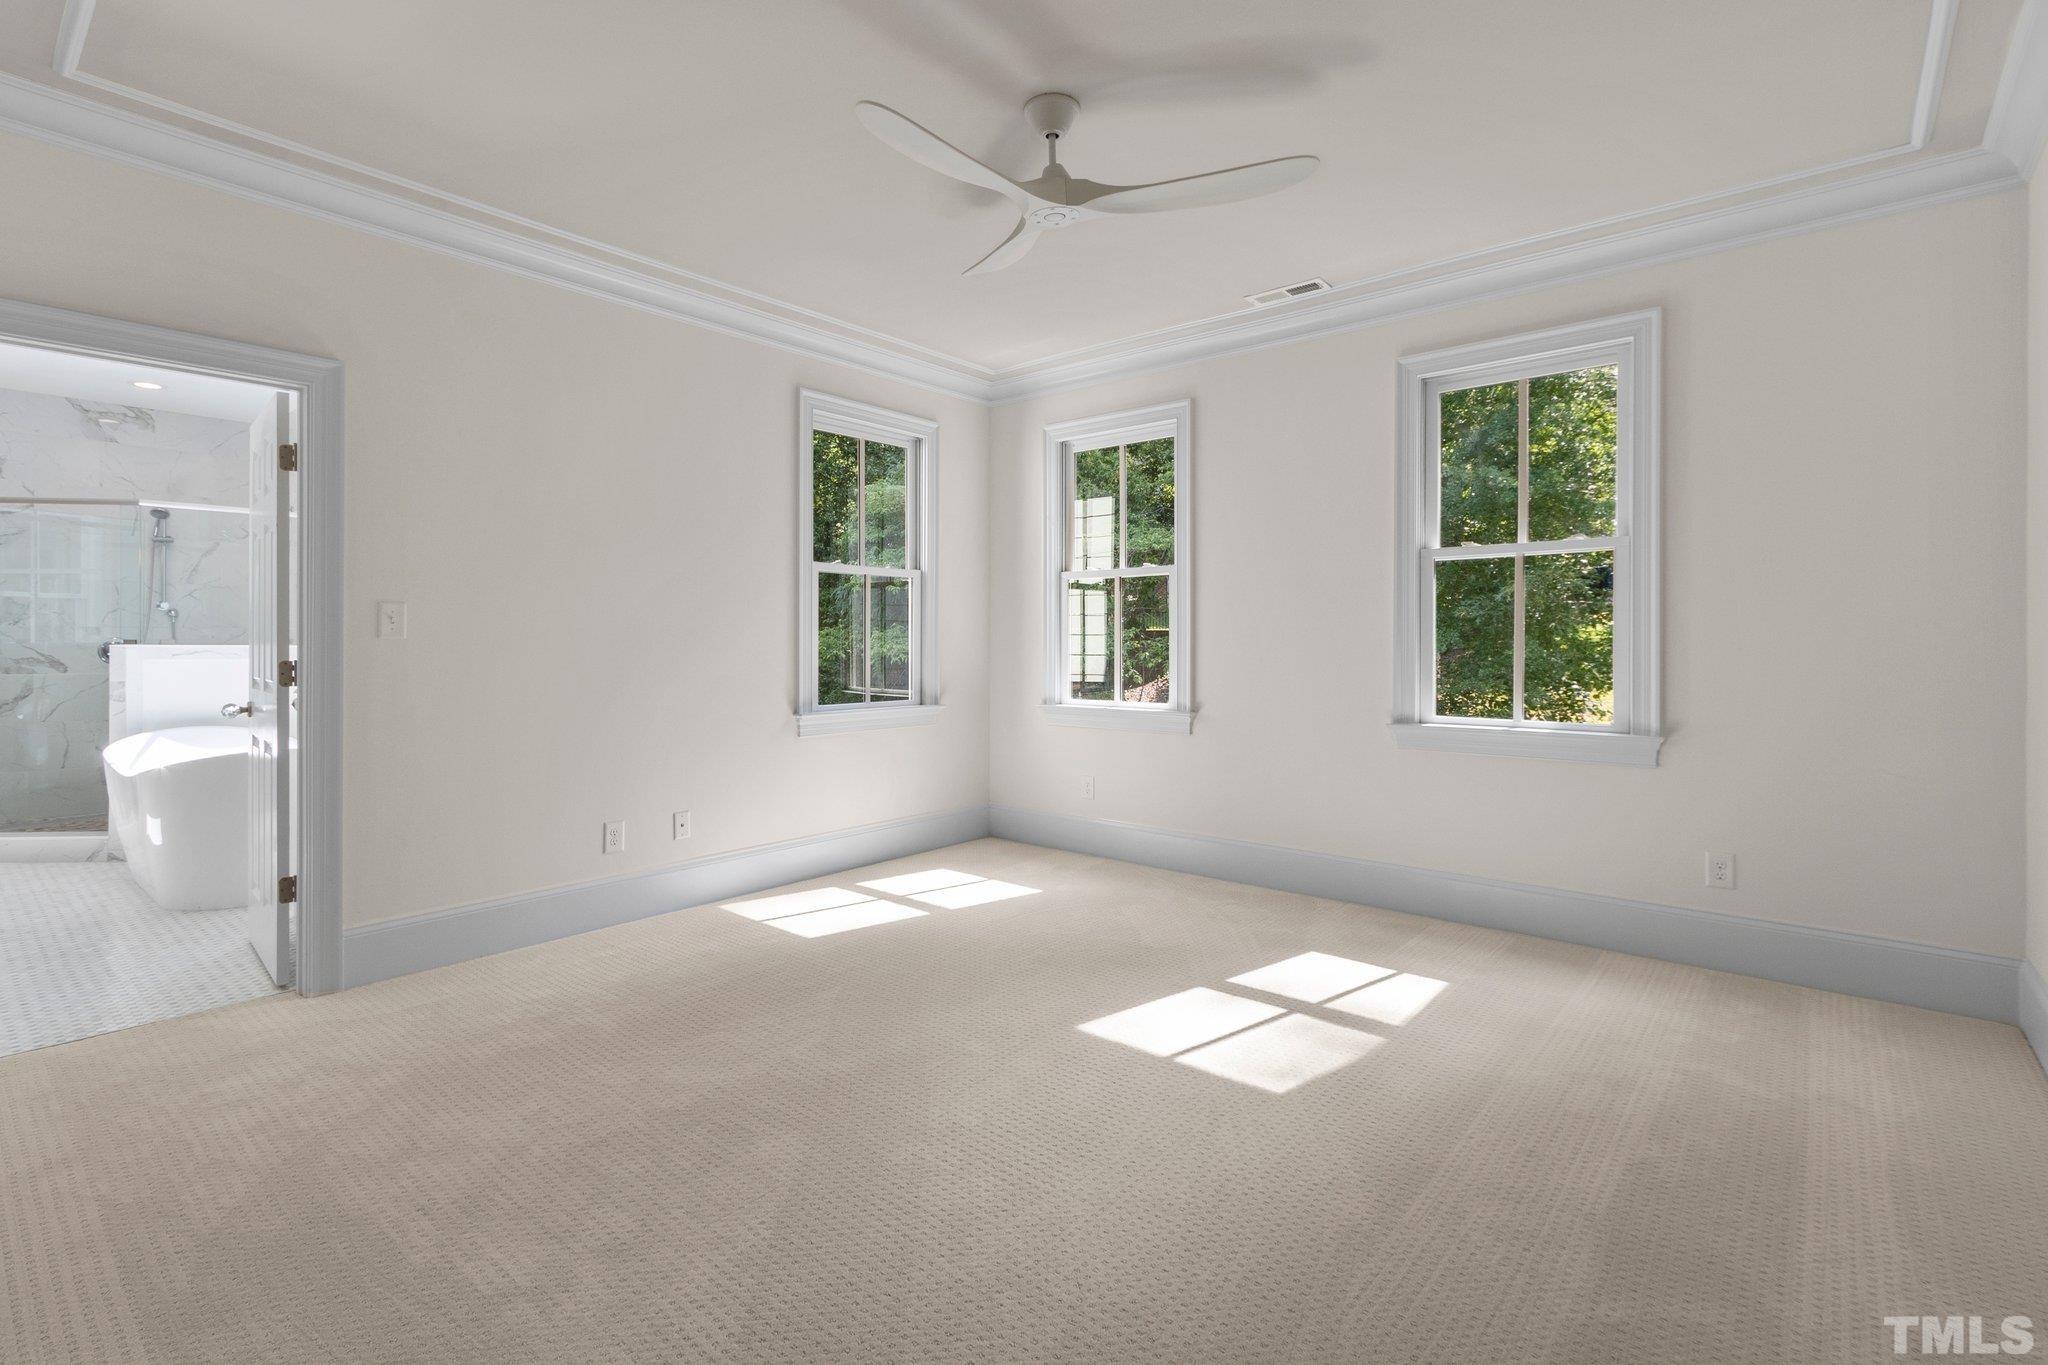 You'll love this Master Bedroom with crown molding, ceiling fan and great natural light.